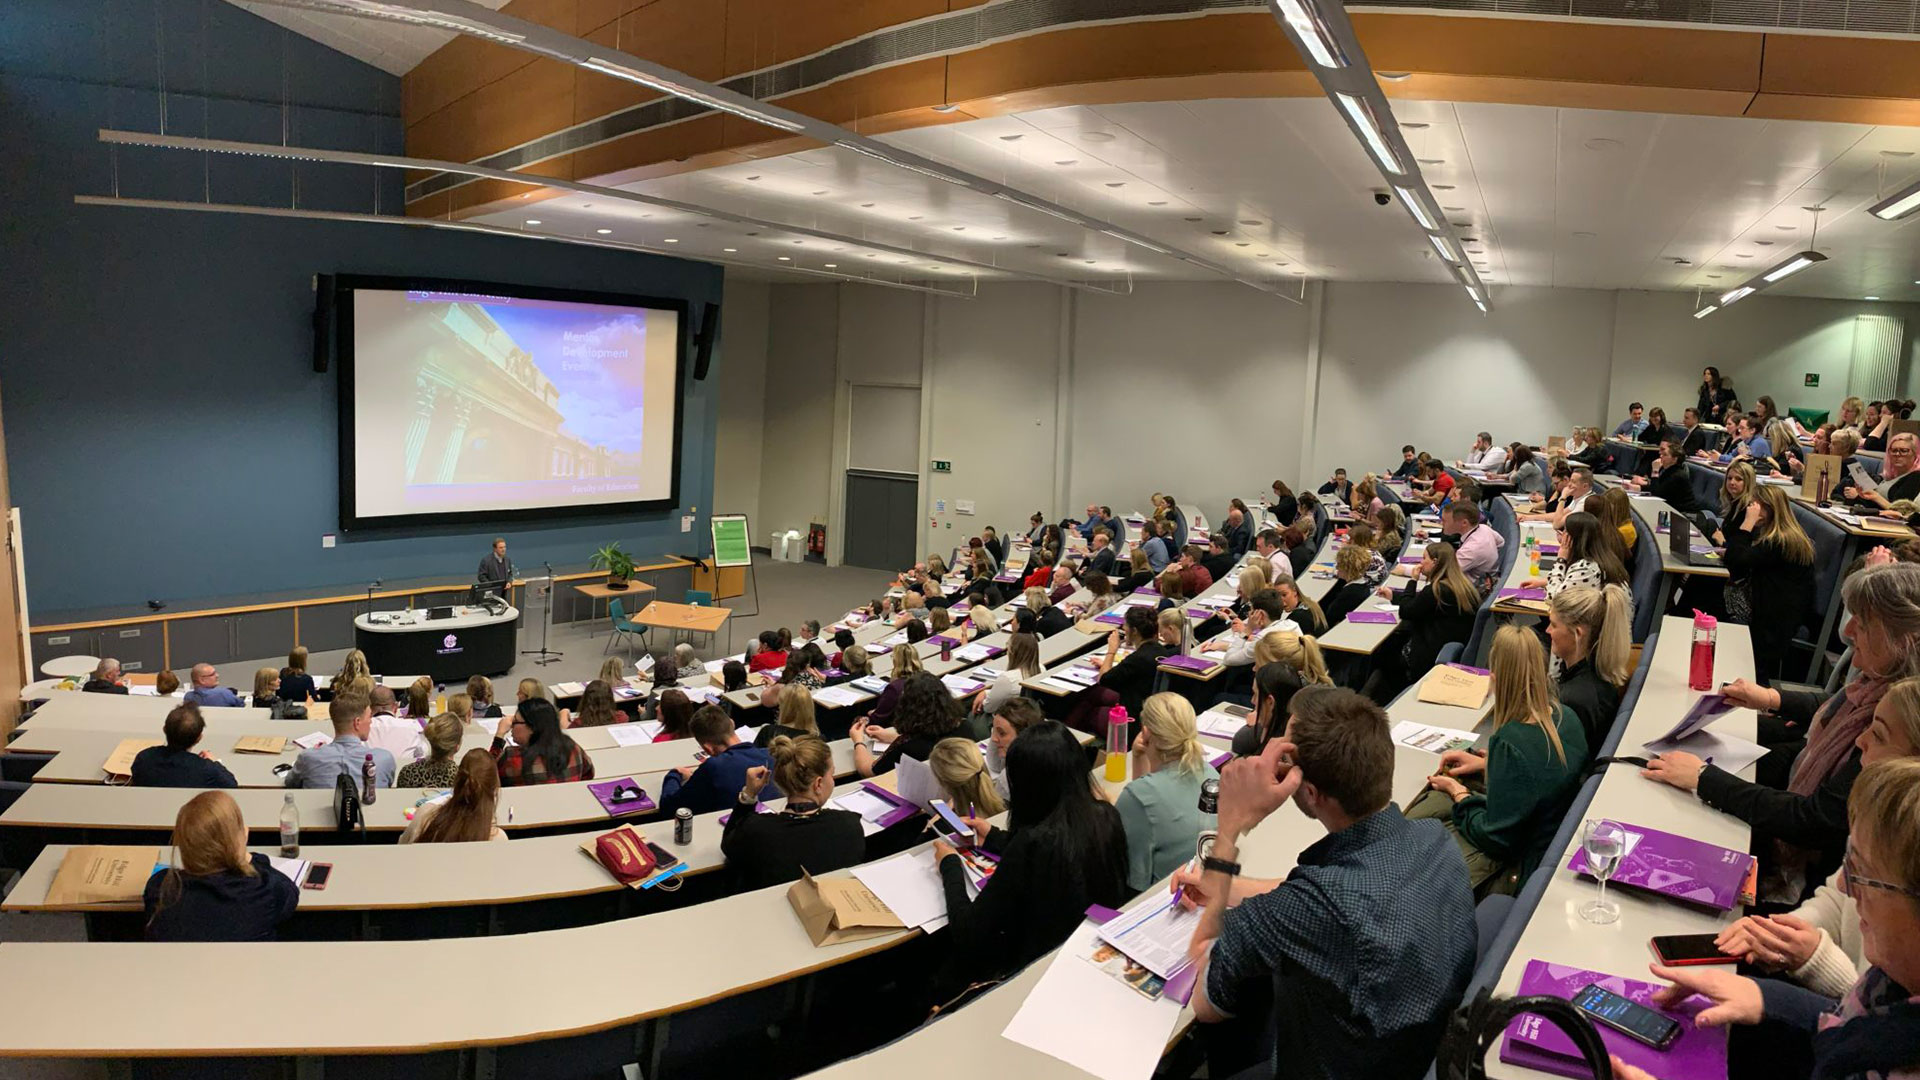 A lecture theatre full of people, with someone giving a presentation at the front